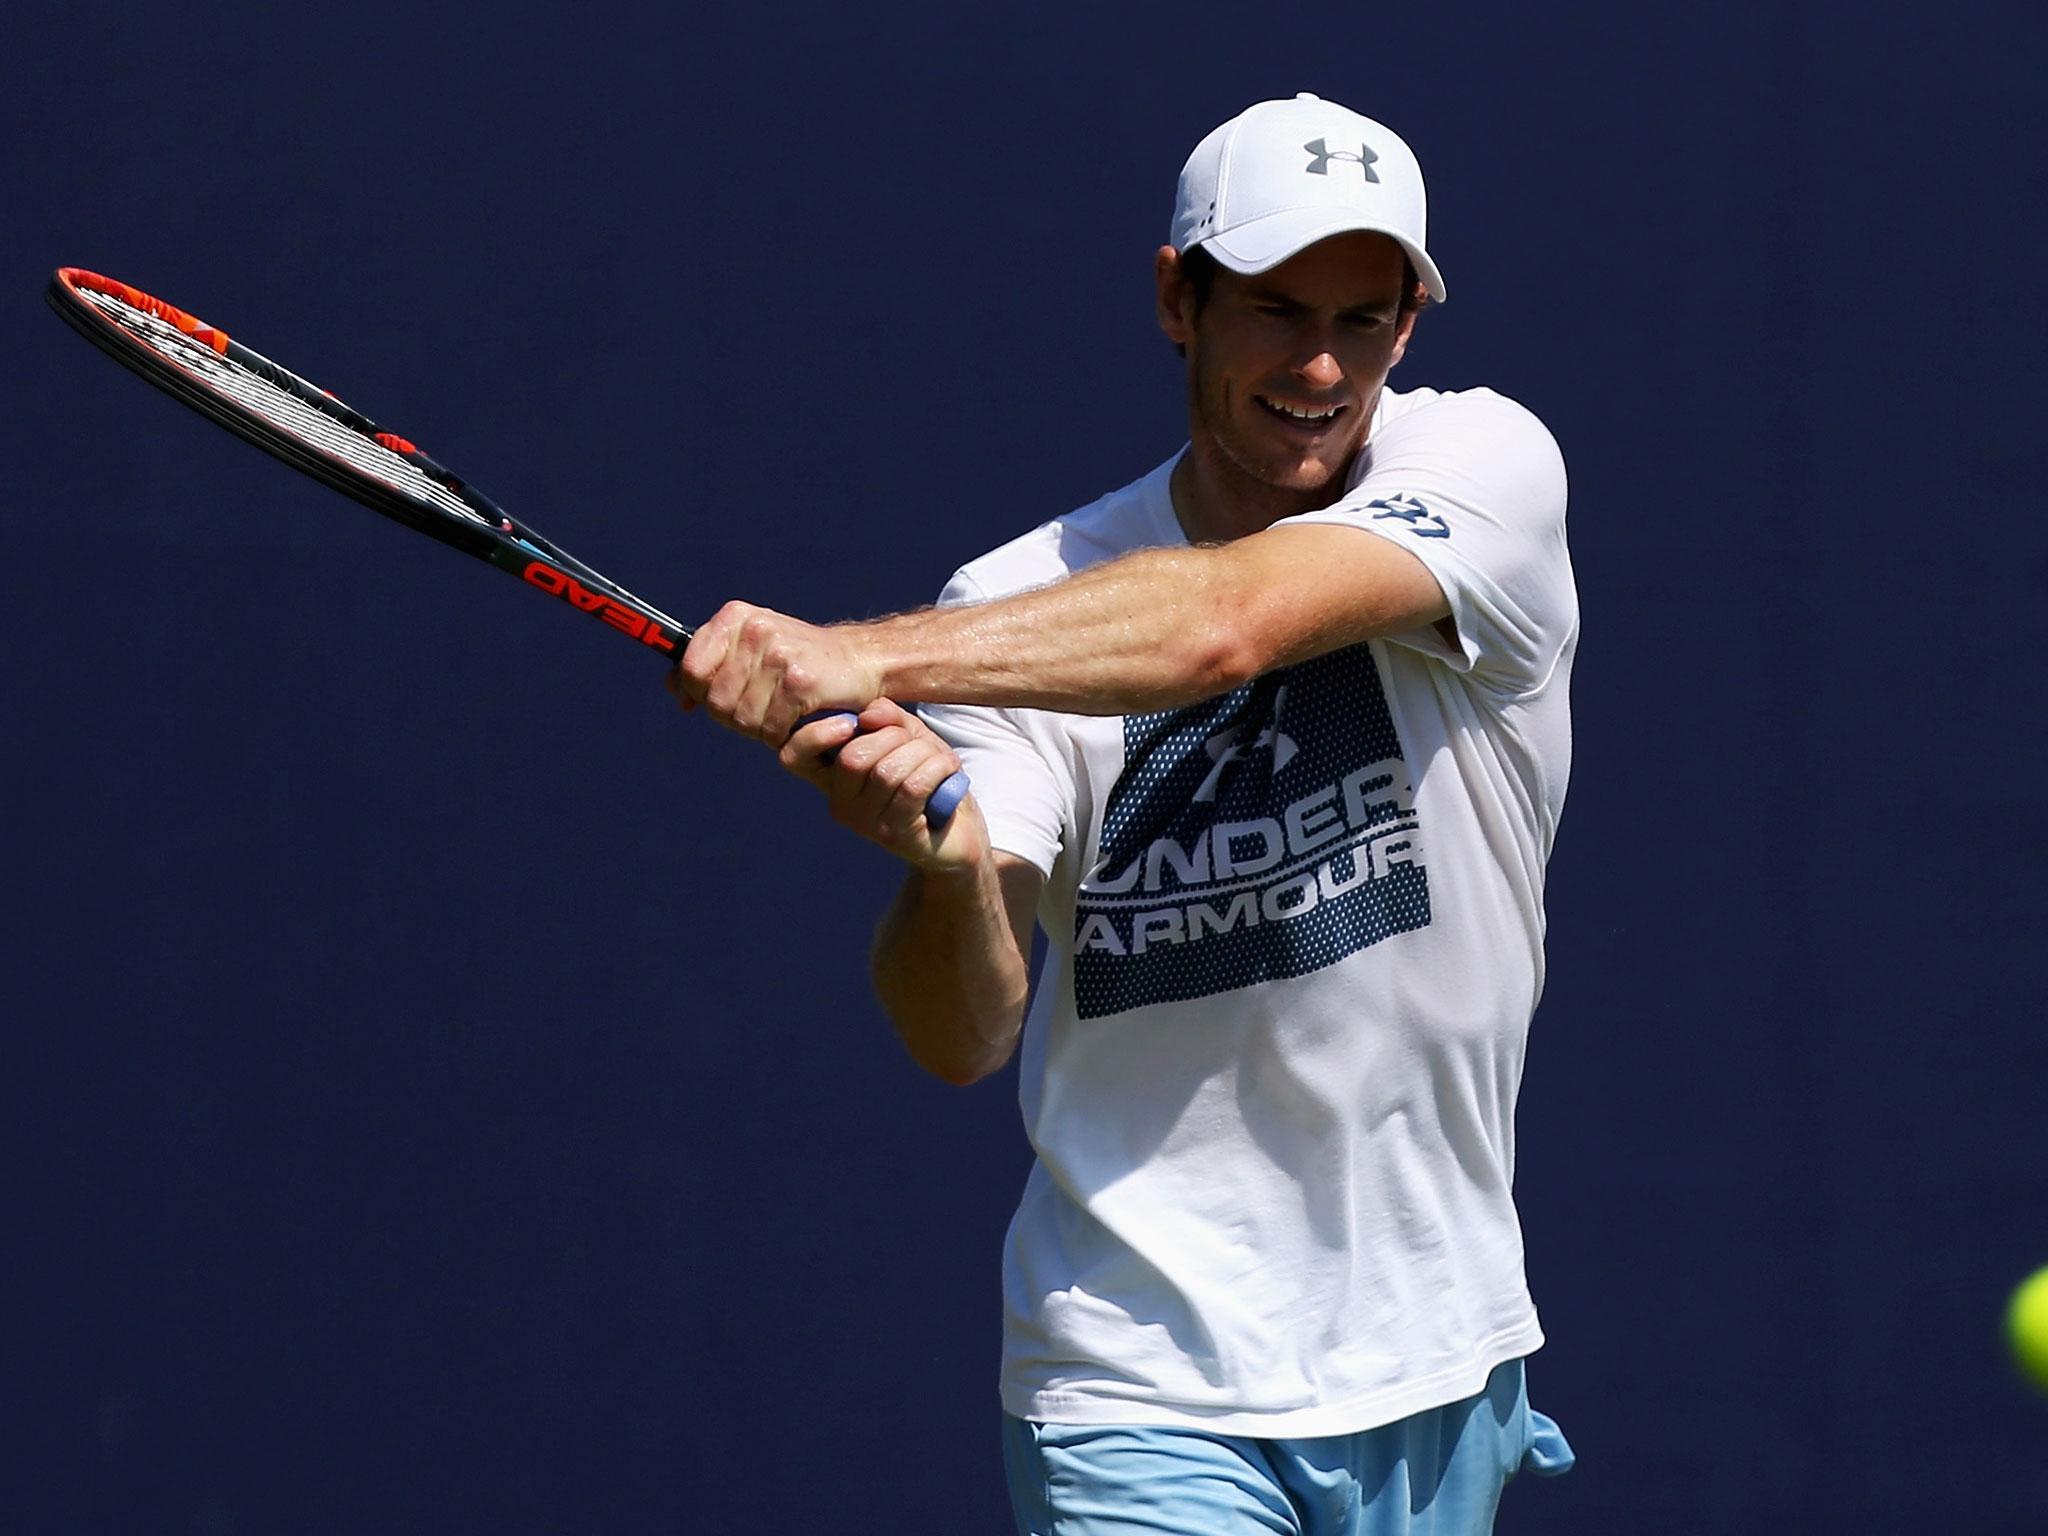 Andy Murray will begin the defence of his title against fellow Brit Aljaz Bedene